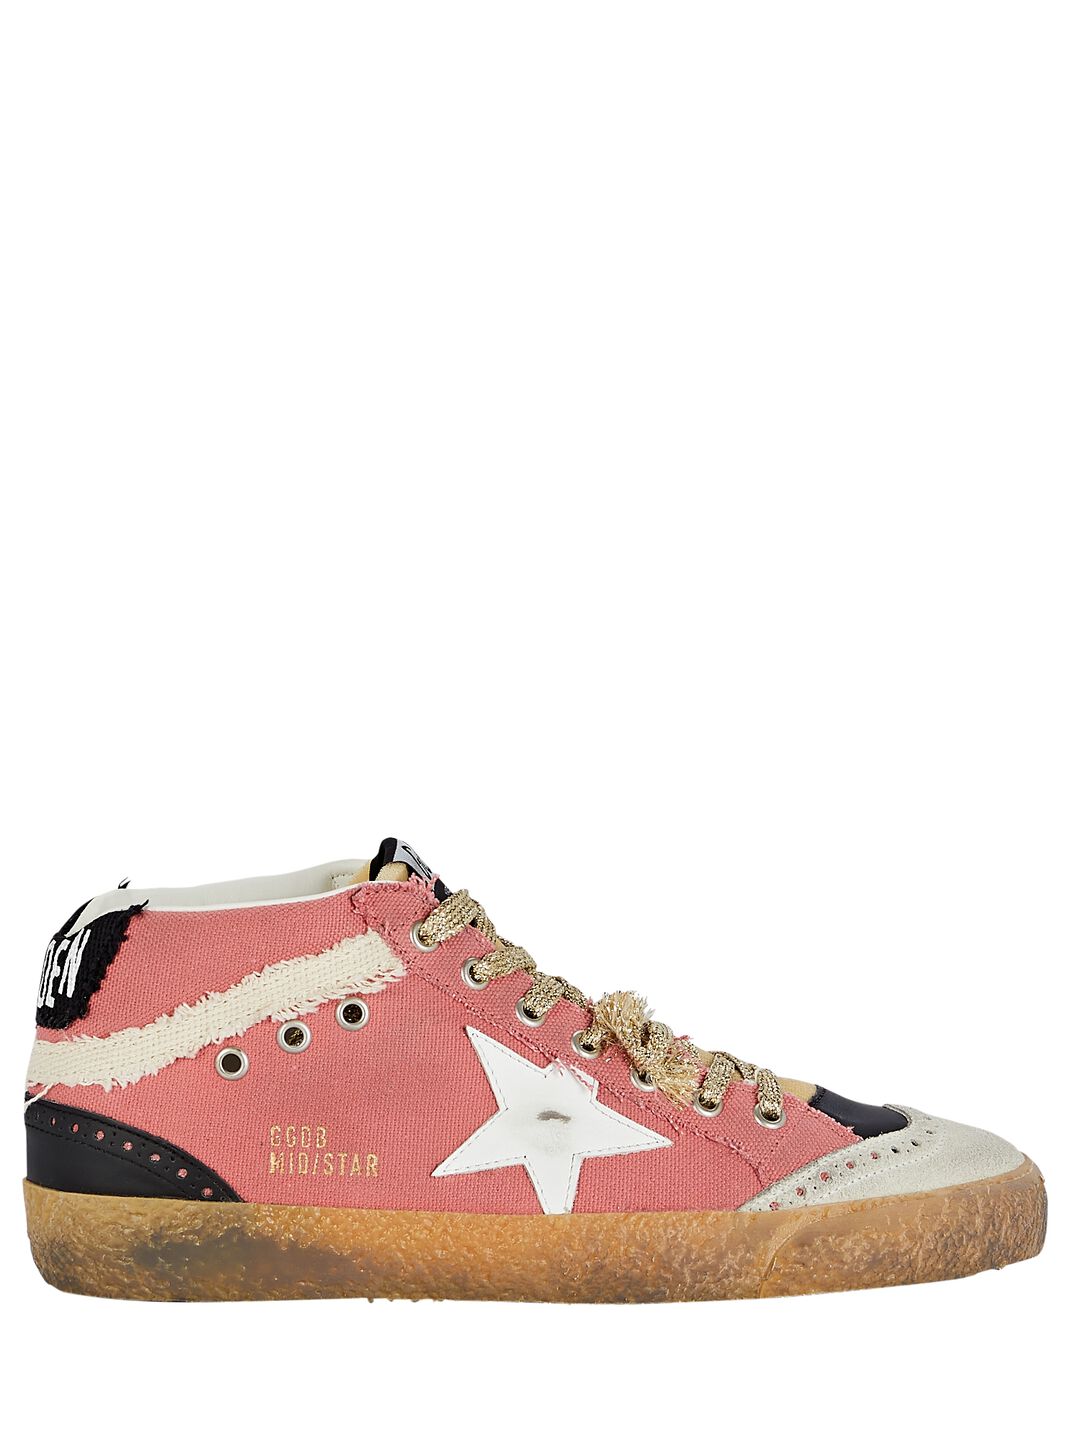 Mid Star Canvas Sneakers